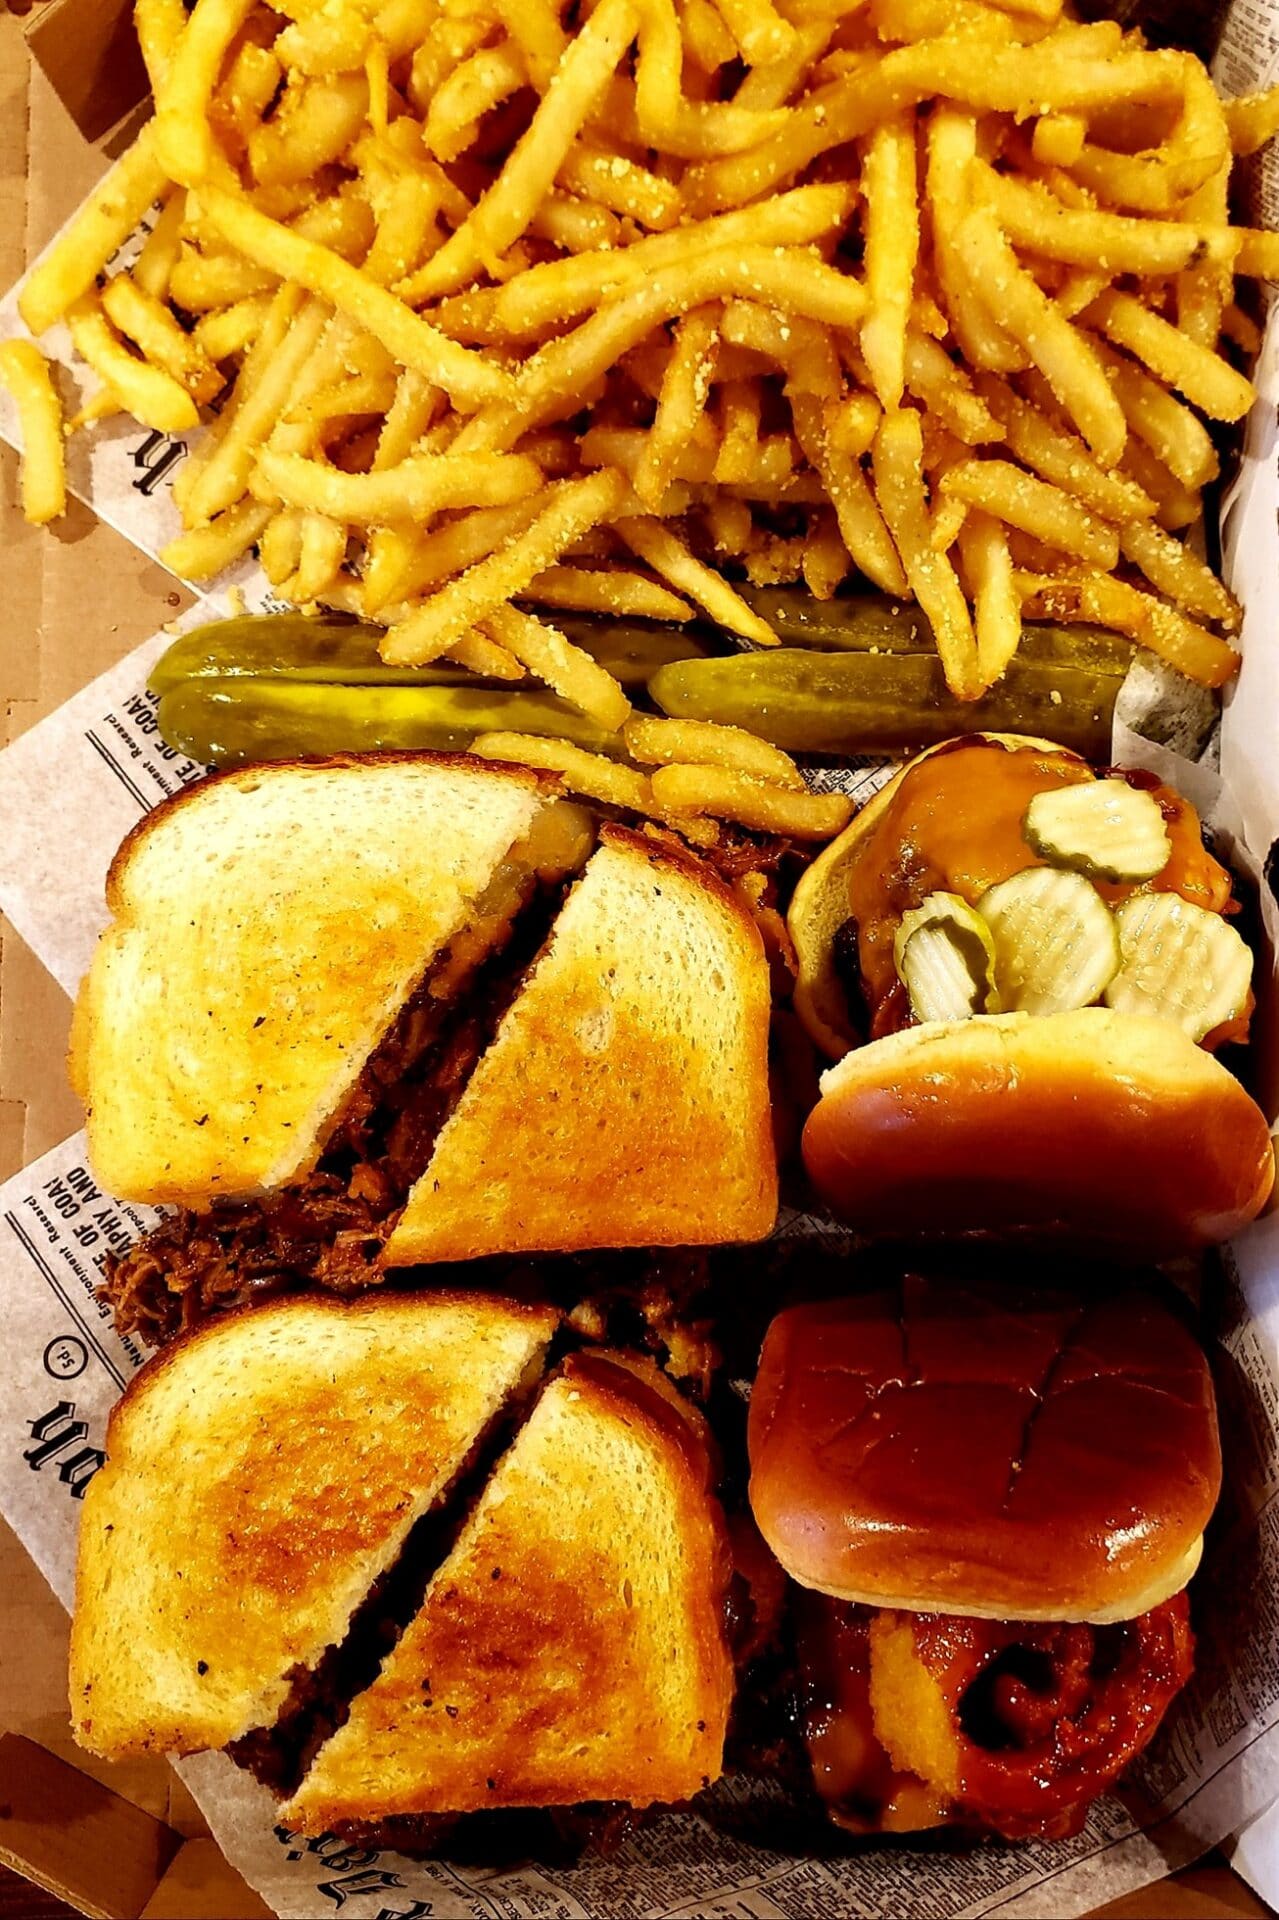 Two sandwiches, 2 Burgers, Pickles & Fries